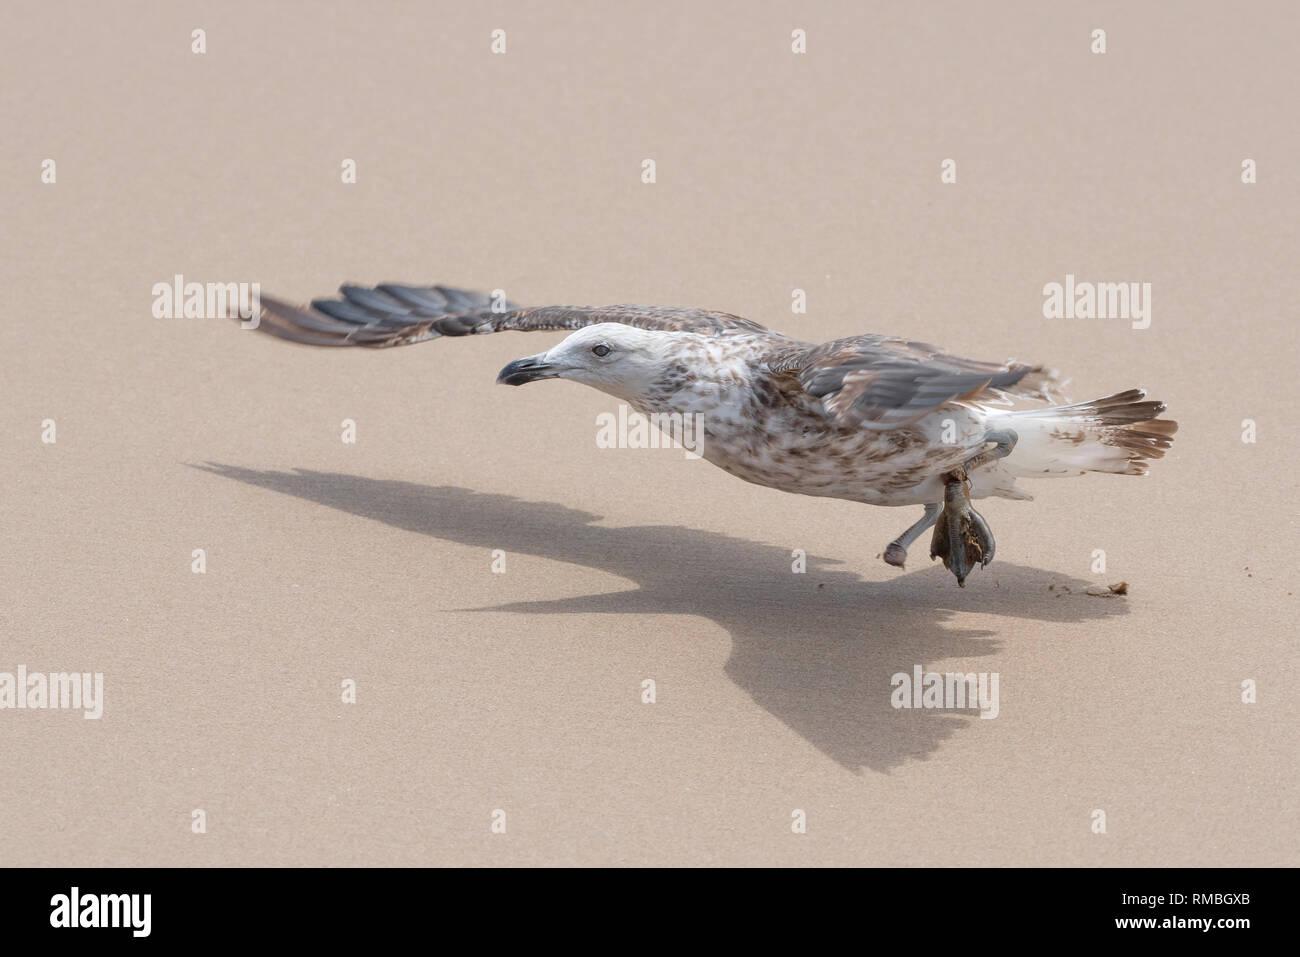 Pollution and human waste products take their toll on wild animals. Pictured is a juvenile kelp gull which has already lost one foot and is about to l Stock Photo